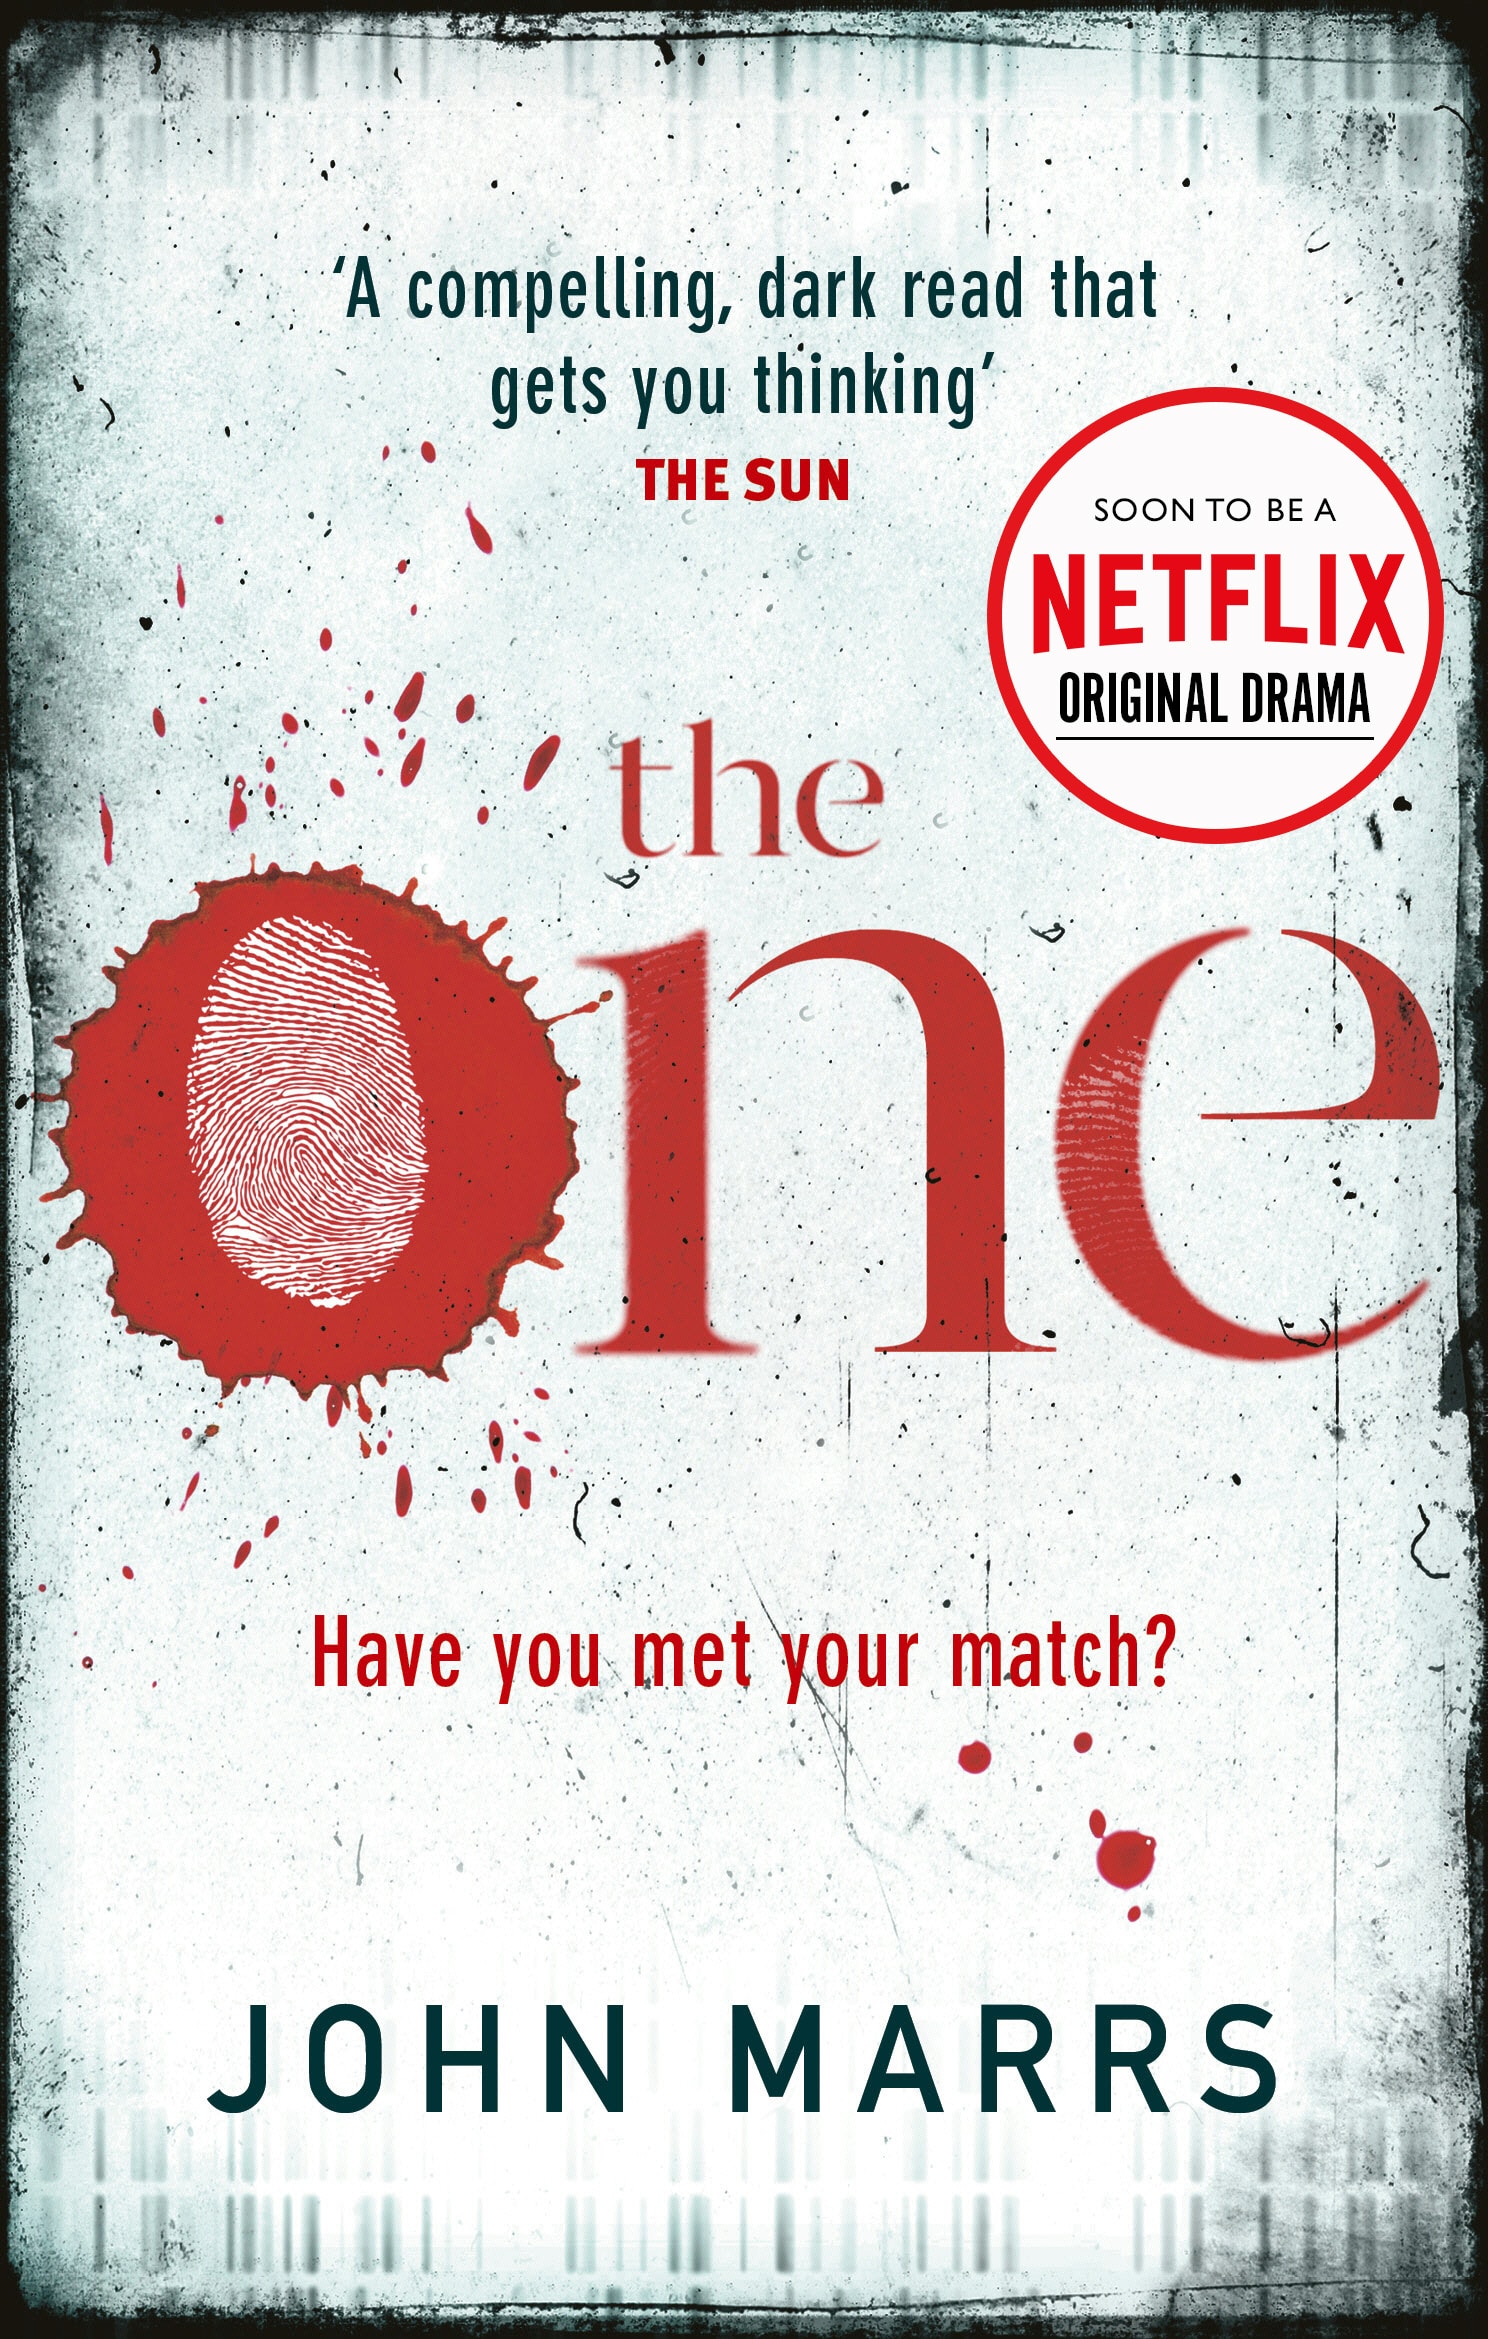 Book jacket of The One by John Marrs